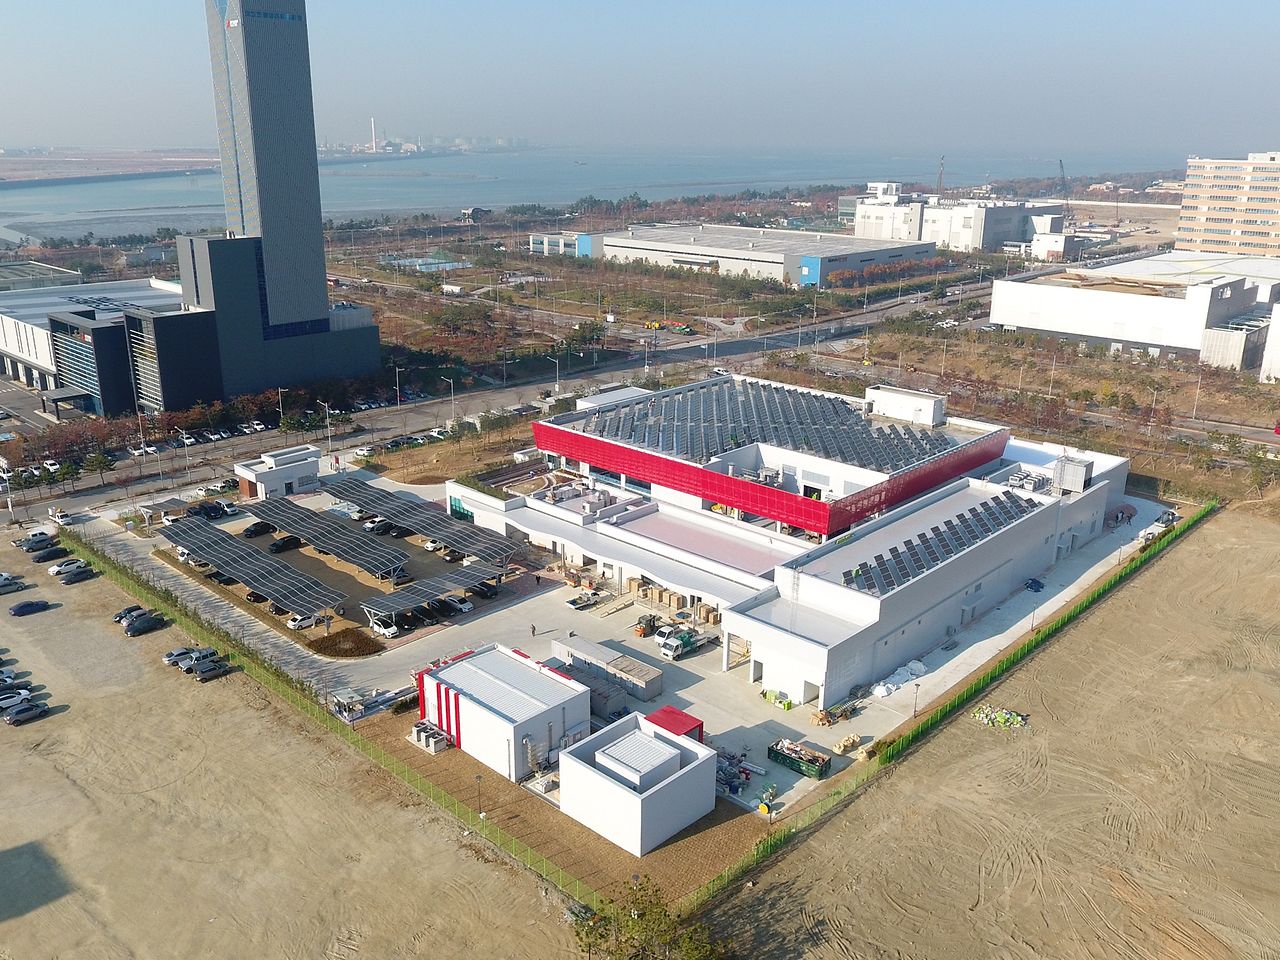 The new high-tech facility for electronics will be the first chemical manufacturing plant in South Korea to be awarded the LEED Gold certification.